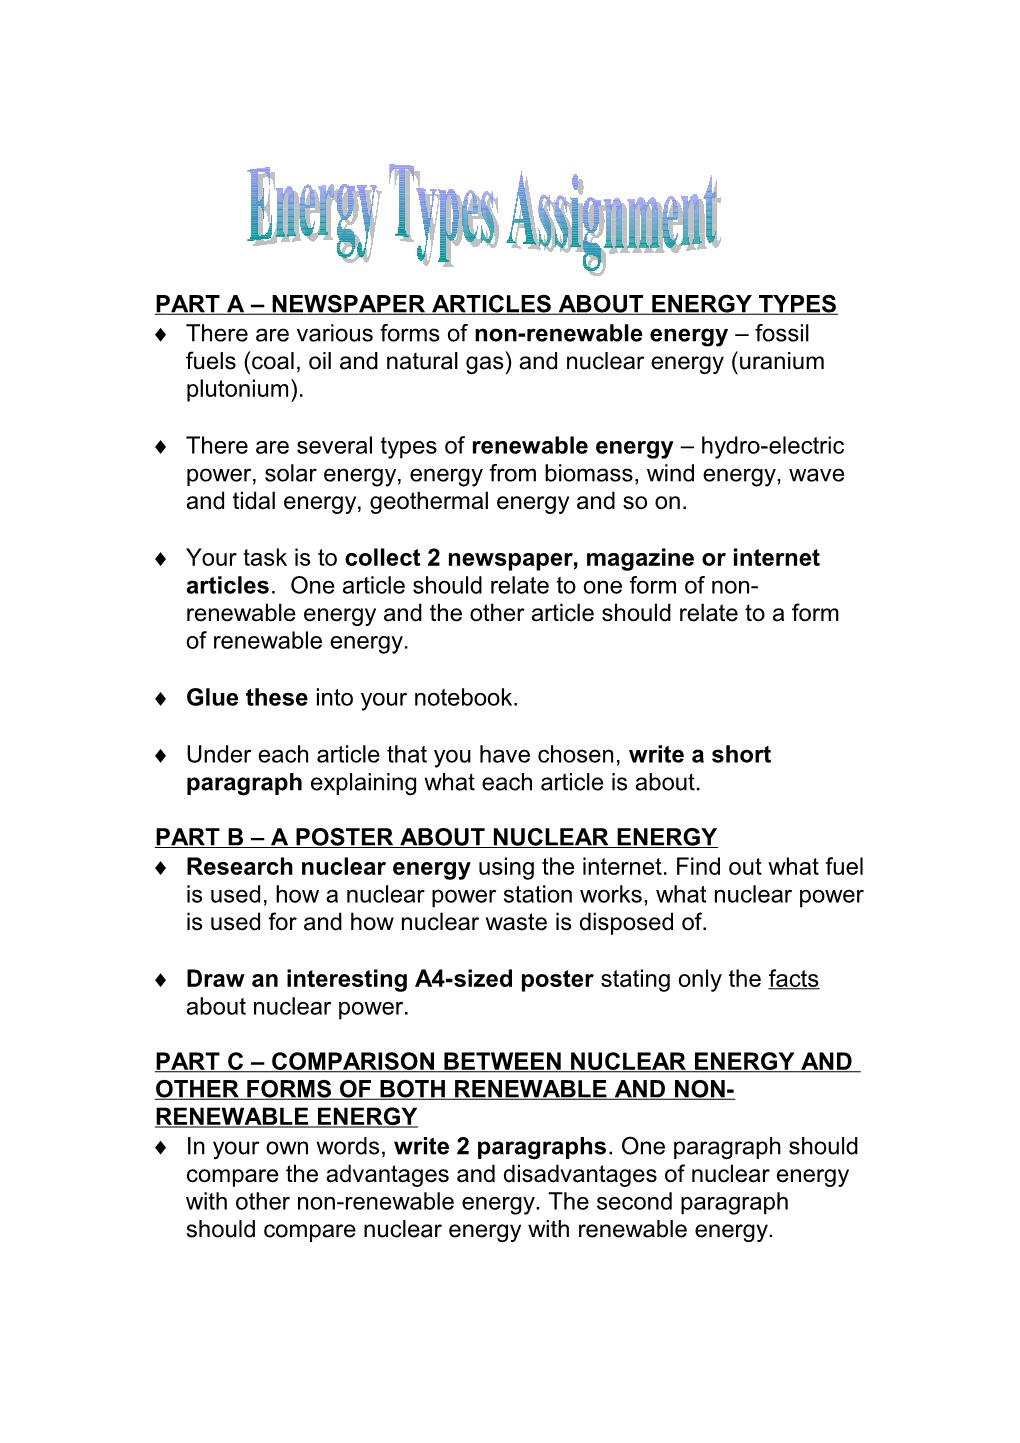 Part a Newspaper Articles About Energy Types